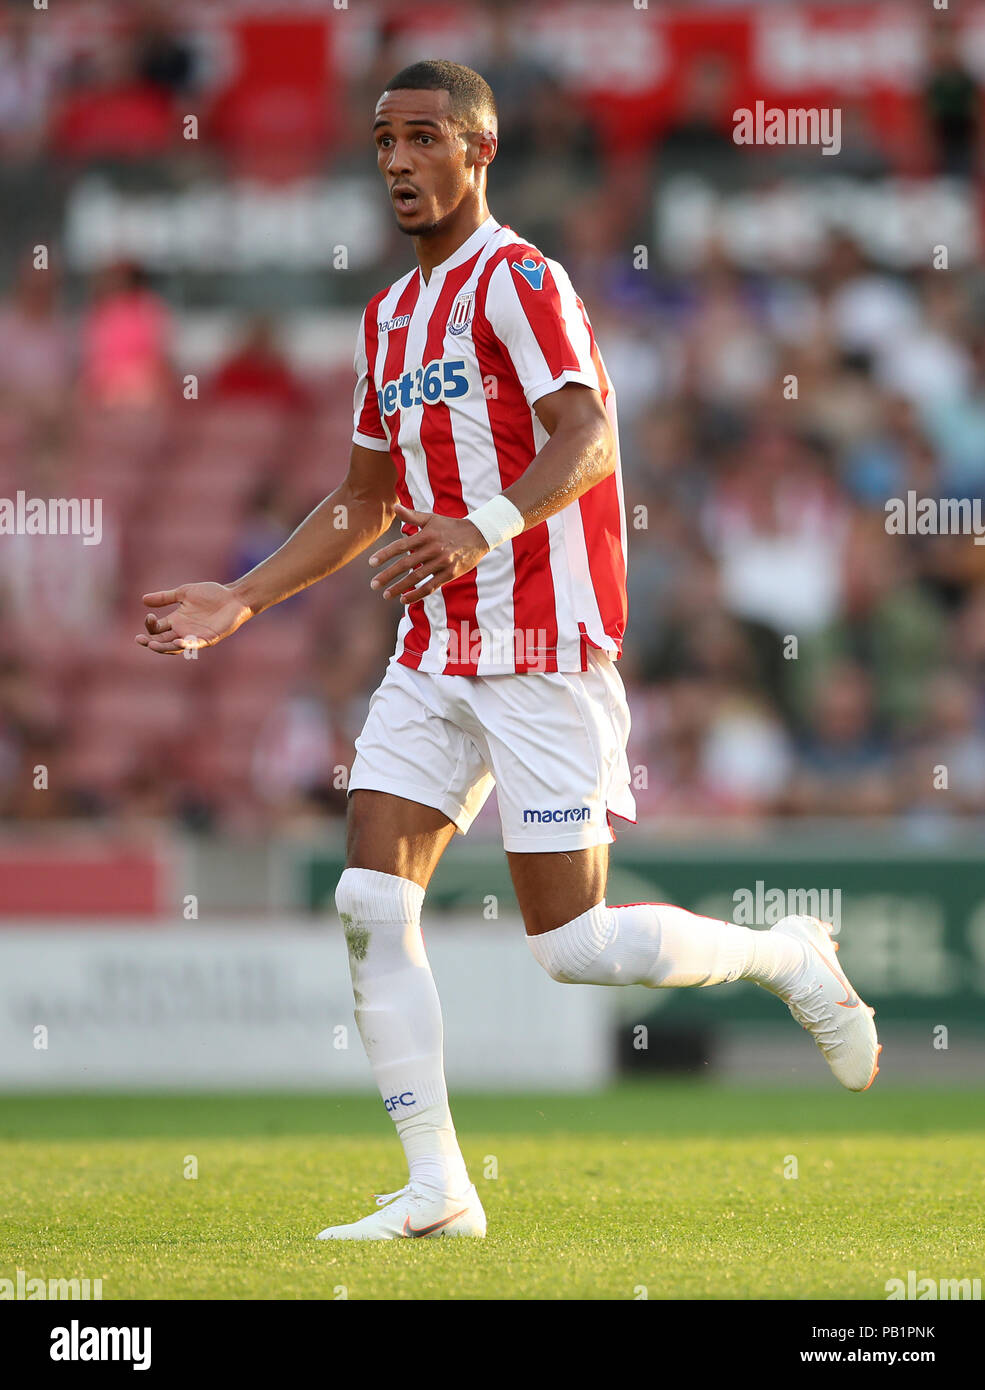 Stoke City's Tom Ince during a pre season friendly match at The Bet365 Stadium, Stoke. PRESS ASSOCIATION Photo. Picture date: Wednesday July 25, 2018. Photo credit should read: Nick Potts/PA Wire. EDITORIAL USE ONLY No use with unauthorised audio, video, data, fixture lists, club/league logos or 'live' services. Online in-match use limited to 75 images, no video emulation. No use in betting, games or single club/league/player publications. Stock Photo